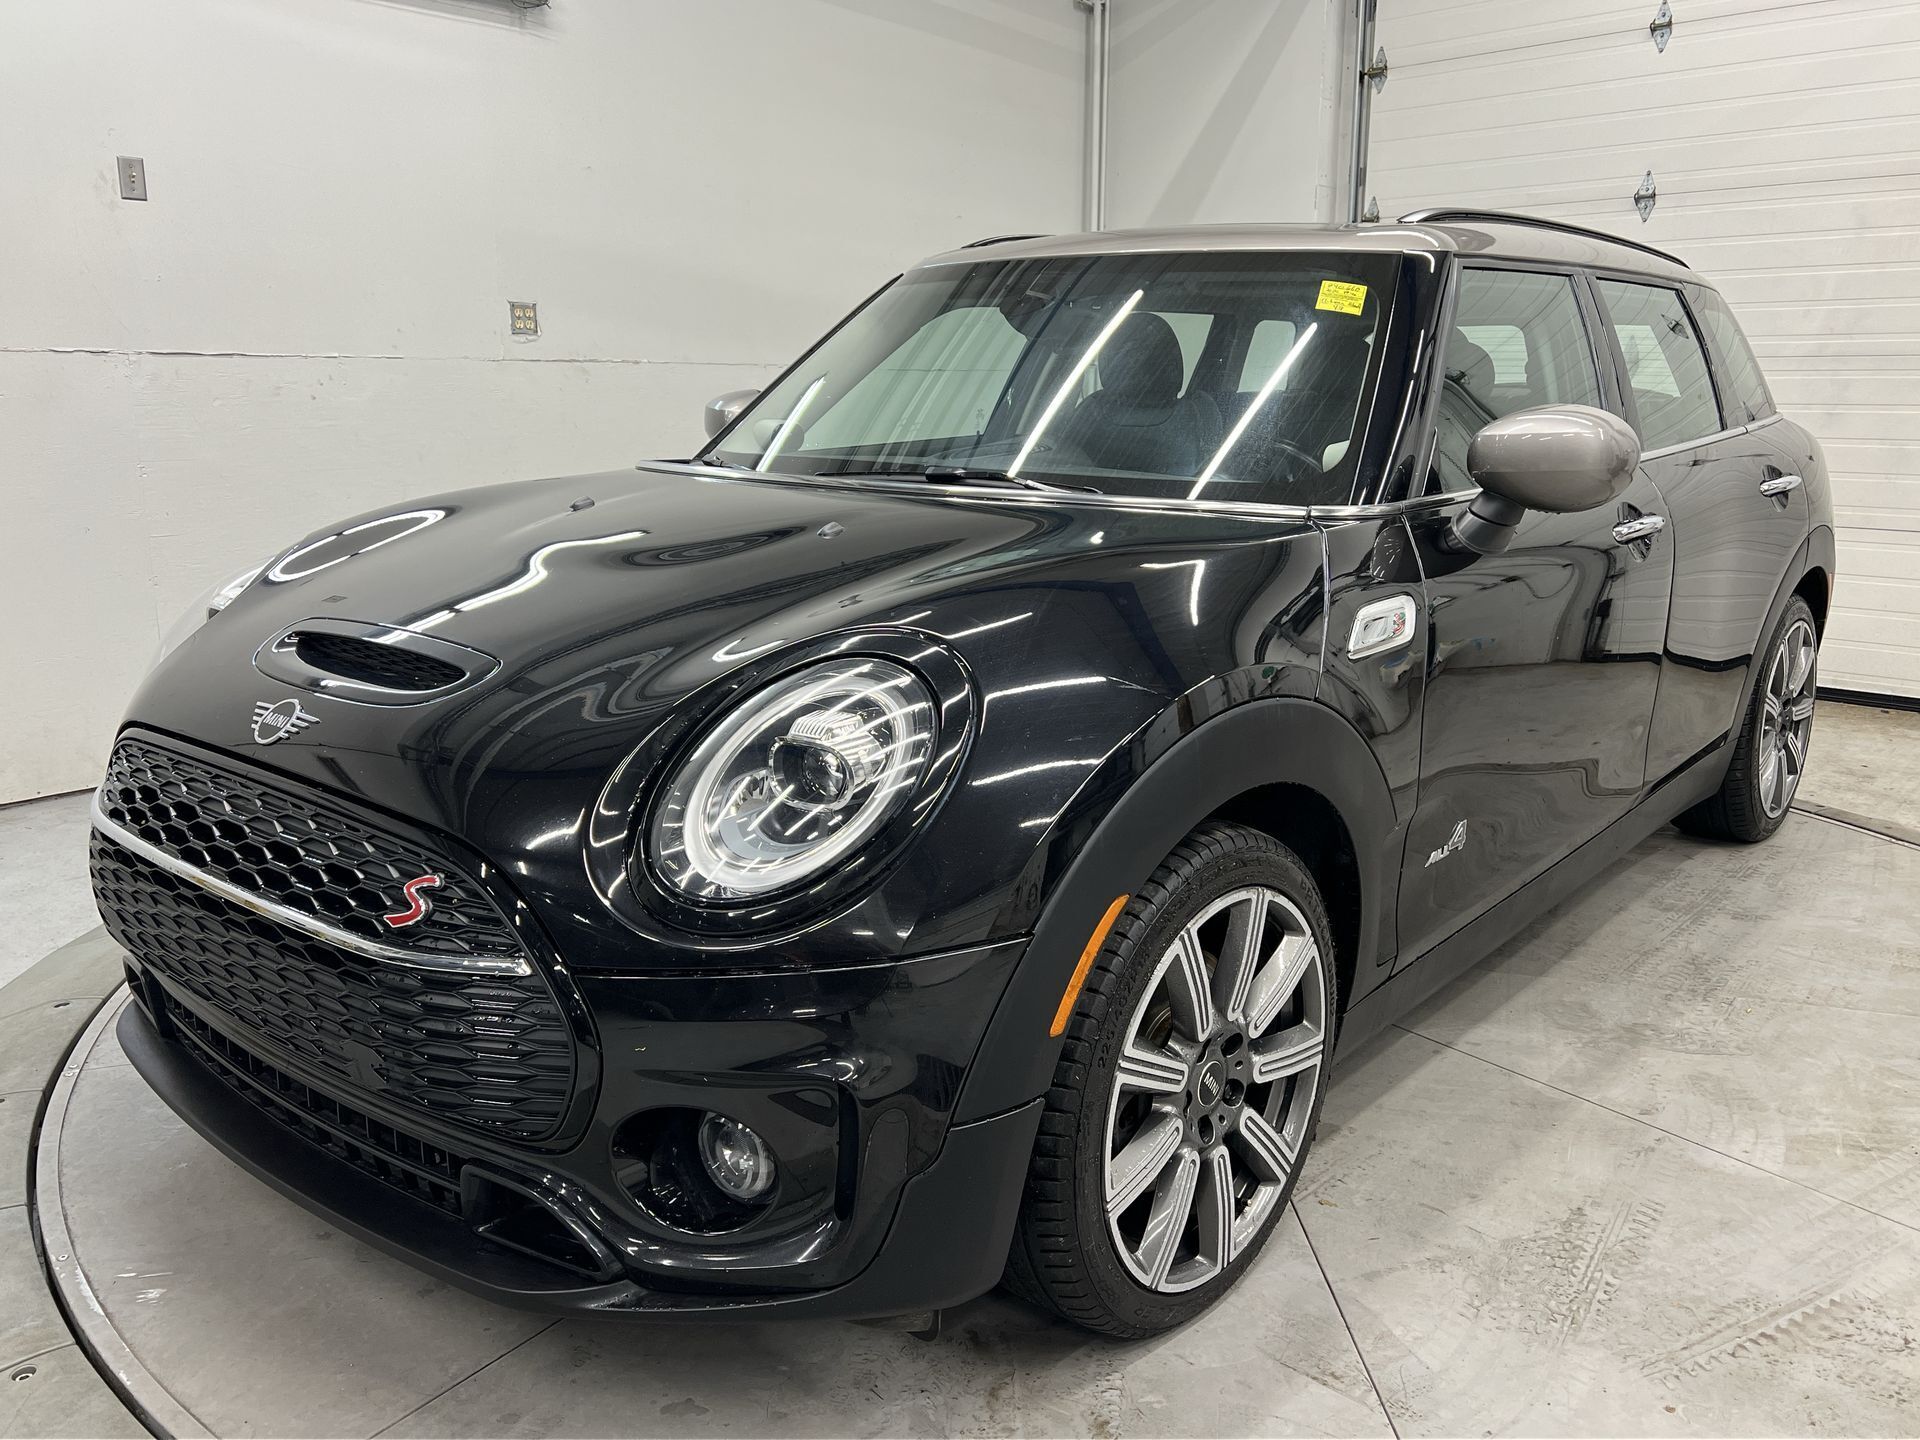 2020 MINI Cooper Clubman S AWD SIGNATURE| PANO ROOF| LEATHER| NAV| REAR CAM